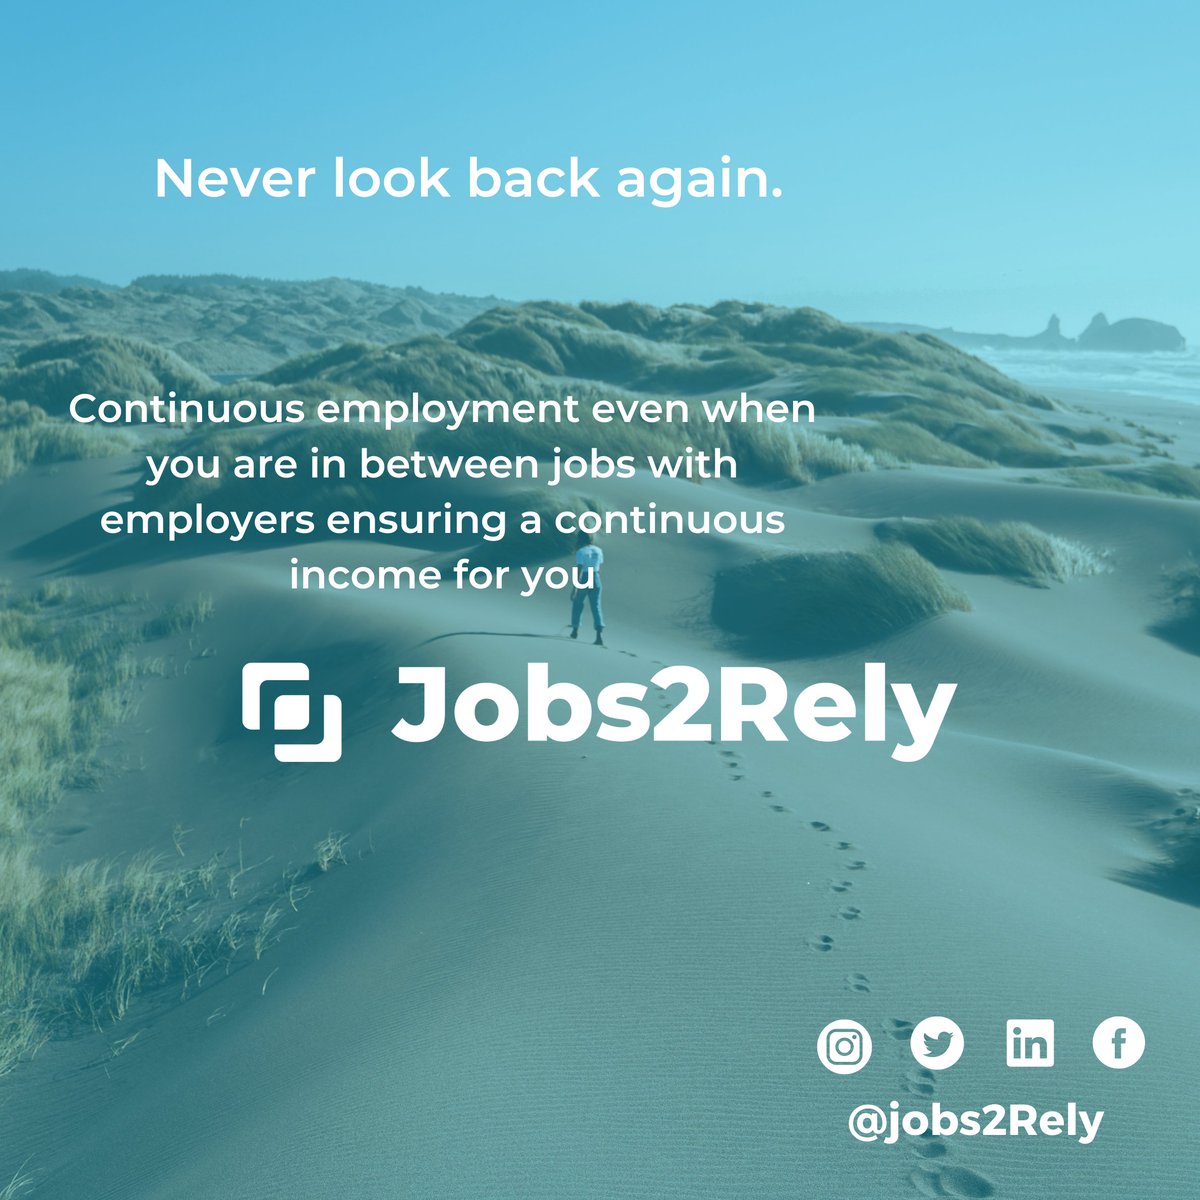 Ready to Love Your Job? Join Us for Non-stop Opportunities and Endless Smiles!

jobs2rely.com

#workfromhome
#hiring
#remotework #remotejobs
#NoMoreLayoffs #Jobs2Rely #lovewhereyouwork #savemoney #savetime #employment #employmentopportunities
#employmentservices #work